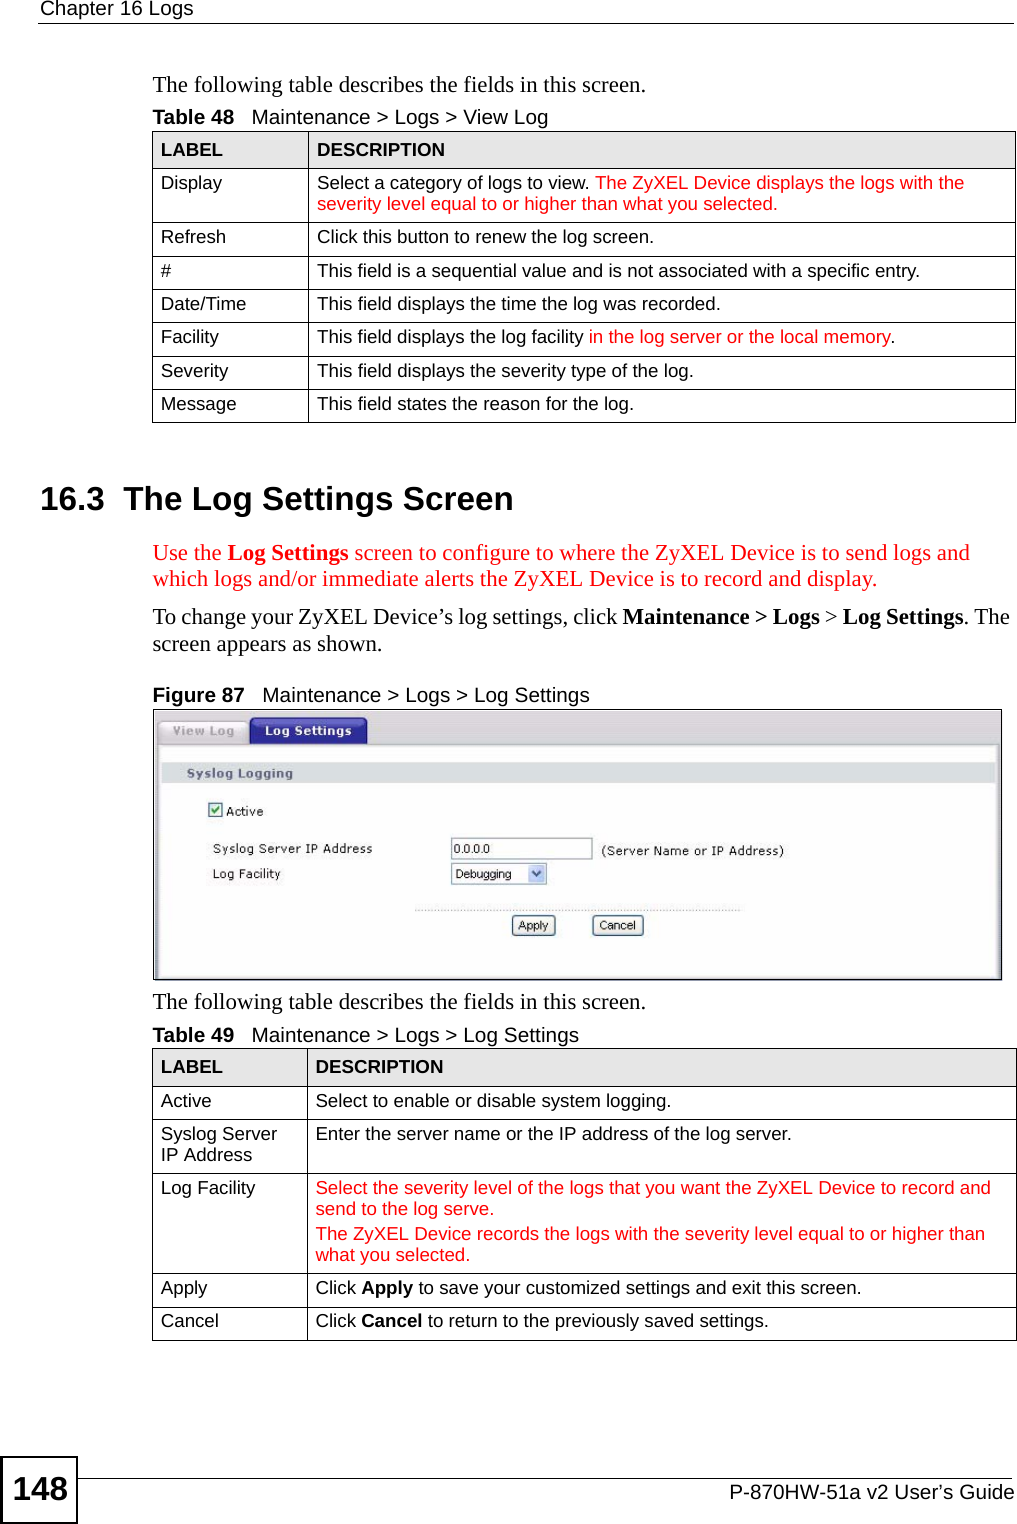 Chapter 16 LogsP-870HW-51a v2 User’s Guide148The following table describes the fields in this screen.  16.3  The Log Settings ScreenUse the Log Settings screen to configure to where the ZyXEL Device is to send logs and which logs and/or immediate alerts the ZyXEL Device is to record and display.  To change your ZyXEL Device’s log settings, click Maintenance &gt; Logs &gt; Log Settings. The screen appears as shown.Figure 87   Maintenance &gt; Logs &gt; Log SettingsThe following table describes the fields in this screen. Table 48   Maintenance &gt; Logs &gt; View LogLABEL DESCRIPTIONDisplay  Select a category of logs to view. The ZyXEL Device displays the logs with the severity level equal to or higher than what you selected.Refresh Click this button to renew the log screen. #This field is a sequential value and is not associated with a specific entry.Date/Time  This field displays the time the log was recorded. Facility This field displays the log facility in the log server or the local memory.Severity  This field displays the severity type of the log.Message This field states the reason for the log.Table 49   Maintenance &gt; Logs &gt; Log SettingsLABEL DESCRIPTIONActive Select to enable or disable system logging.Syslog Server IP Address Enter the server name or the IP address of the log server.Log Facility Select the severity level of the logs that you want the ZyXEL Device to record and send to the log serve.The ZyXEL Device records the logs with the severity level equal to or higher than what you selected.Apply Click Apply to save your customized settings and exit this screen. Cancel Click Cancel to return to the previously saved settings.